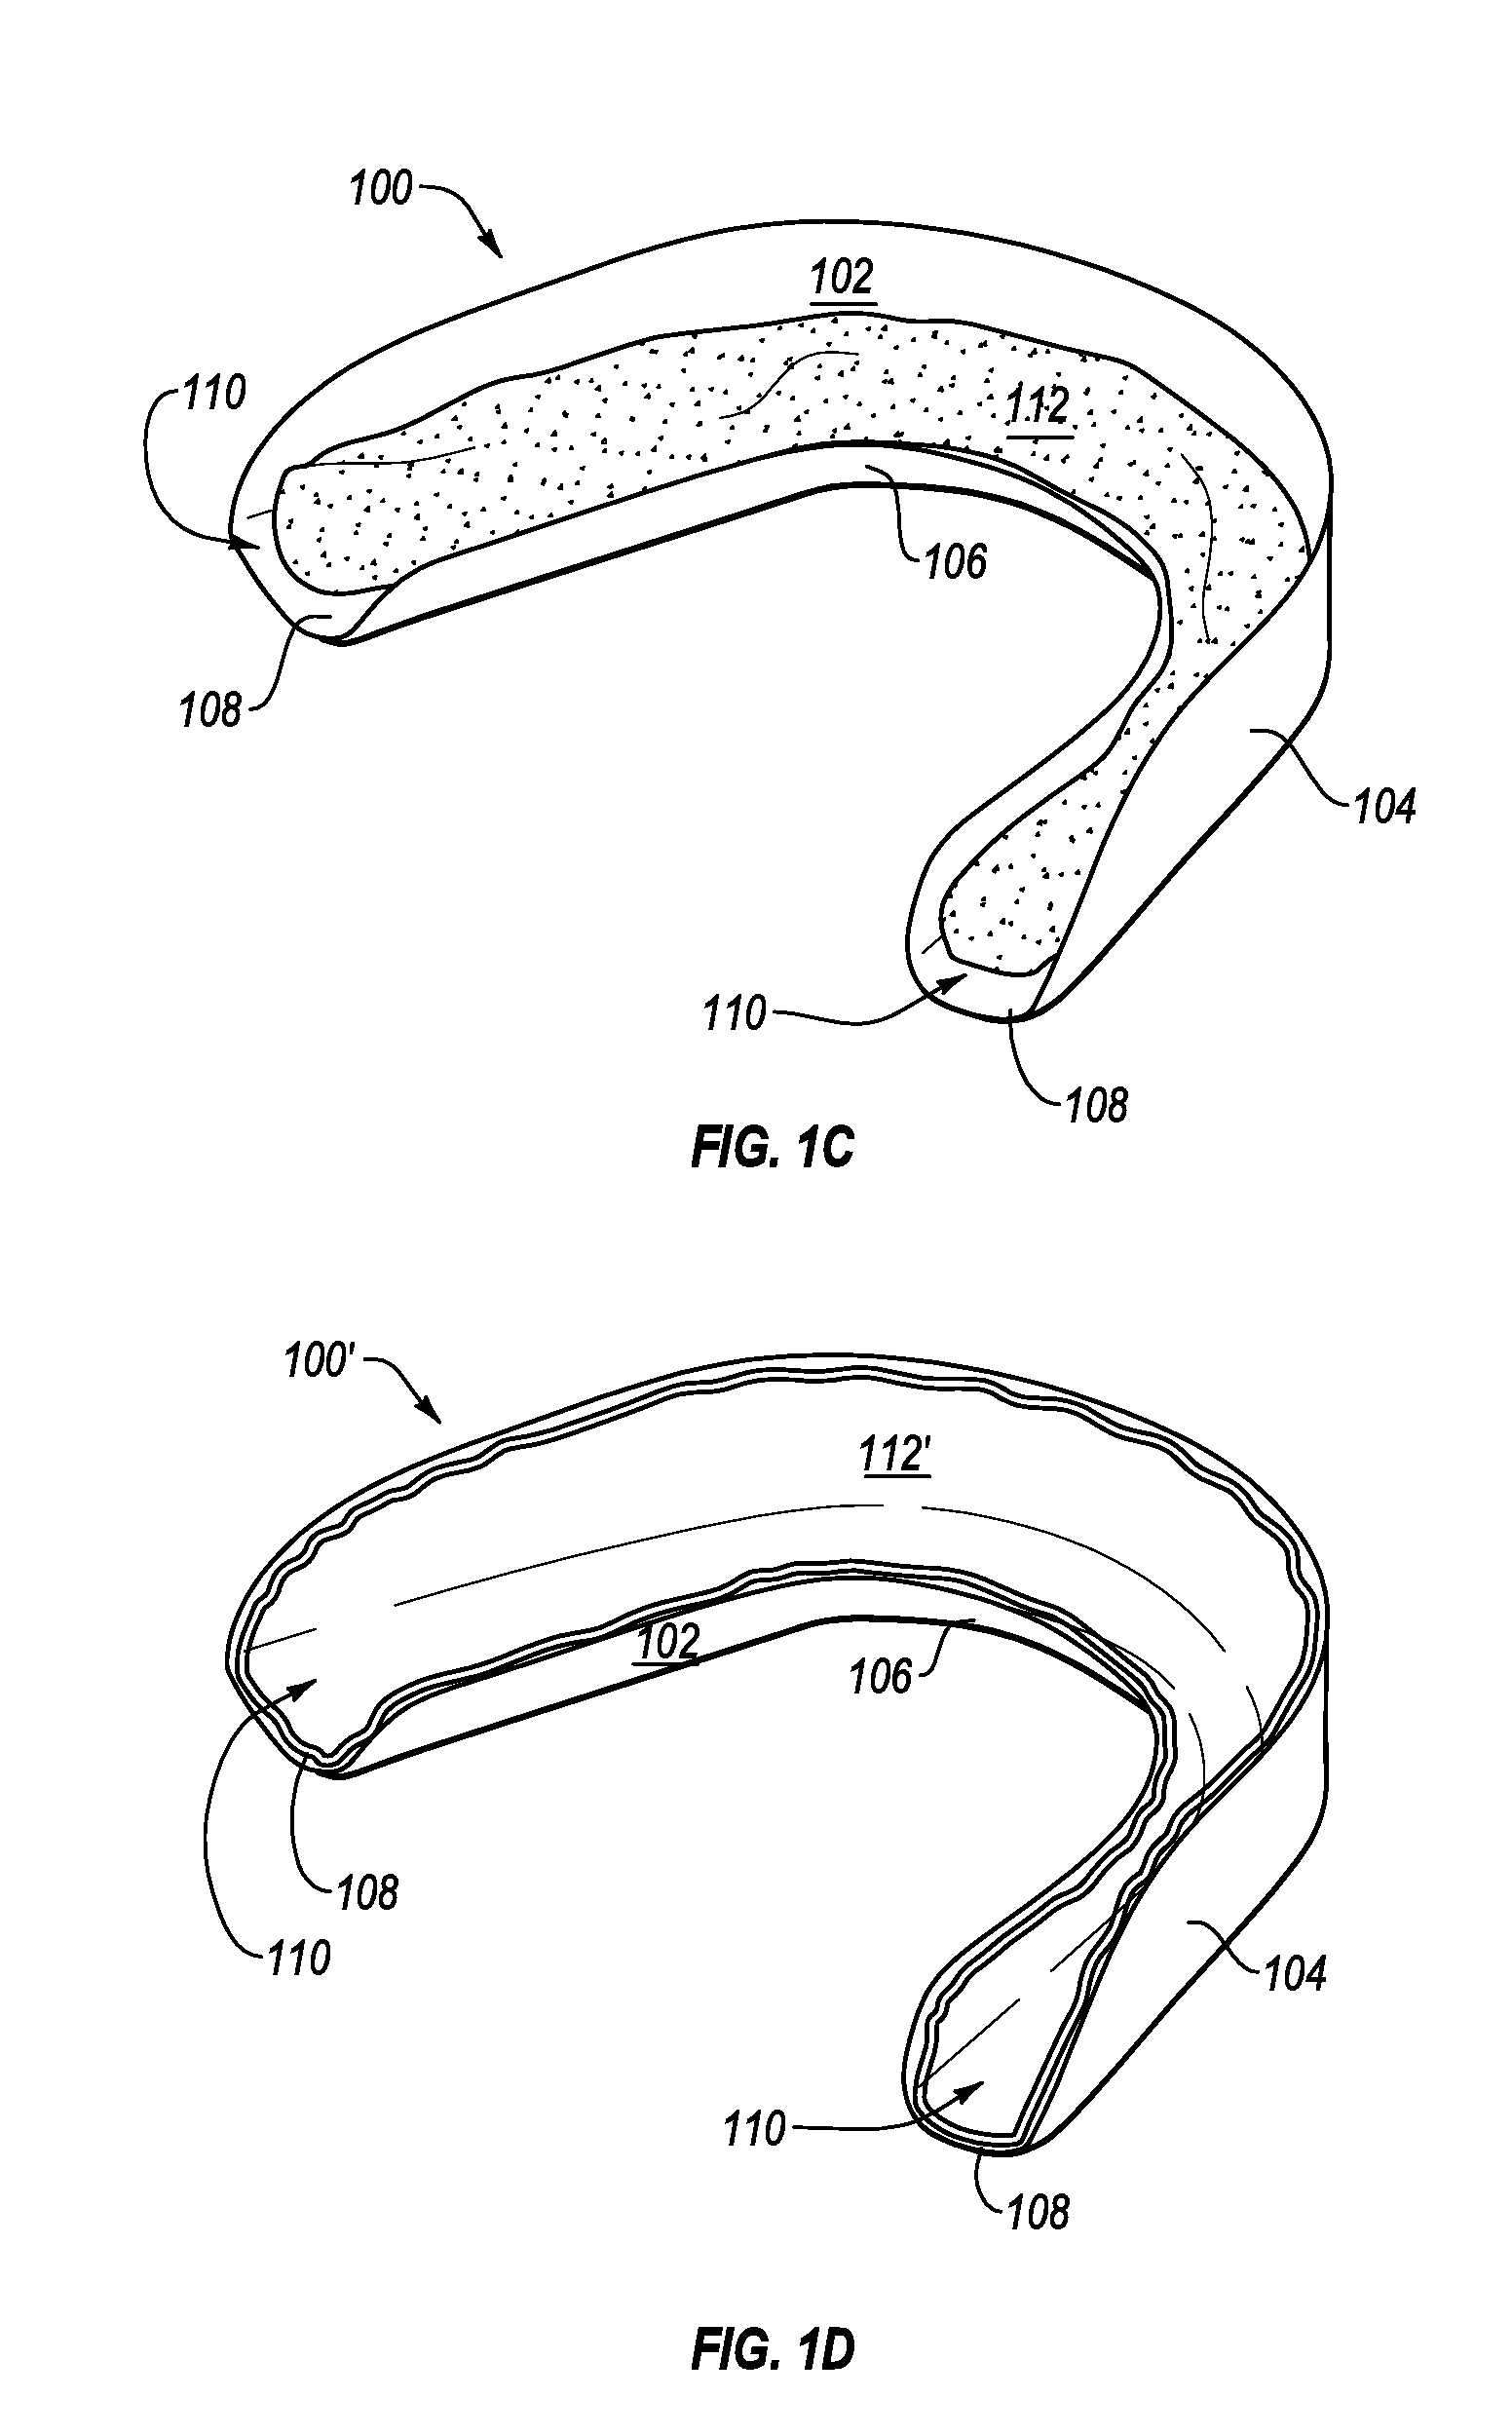 Wax-based compositions, articles made therefrom, and methods of manufacture and use